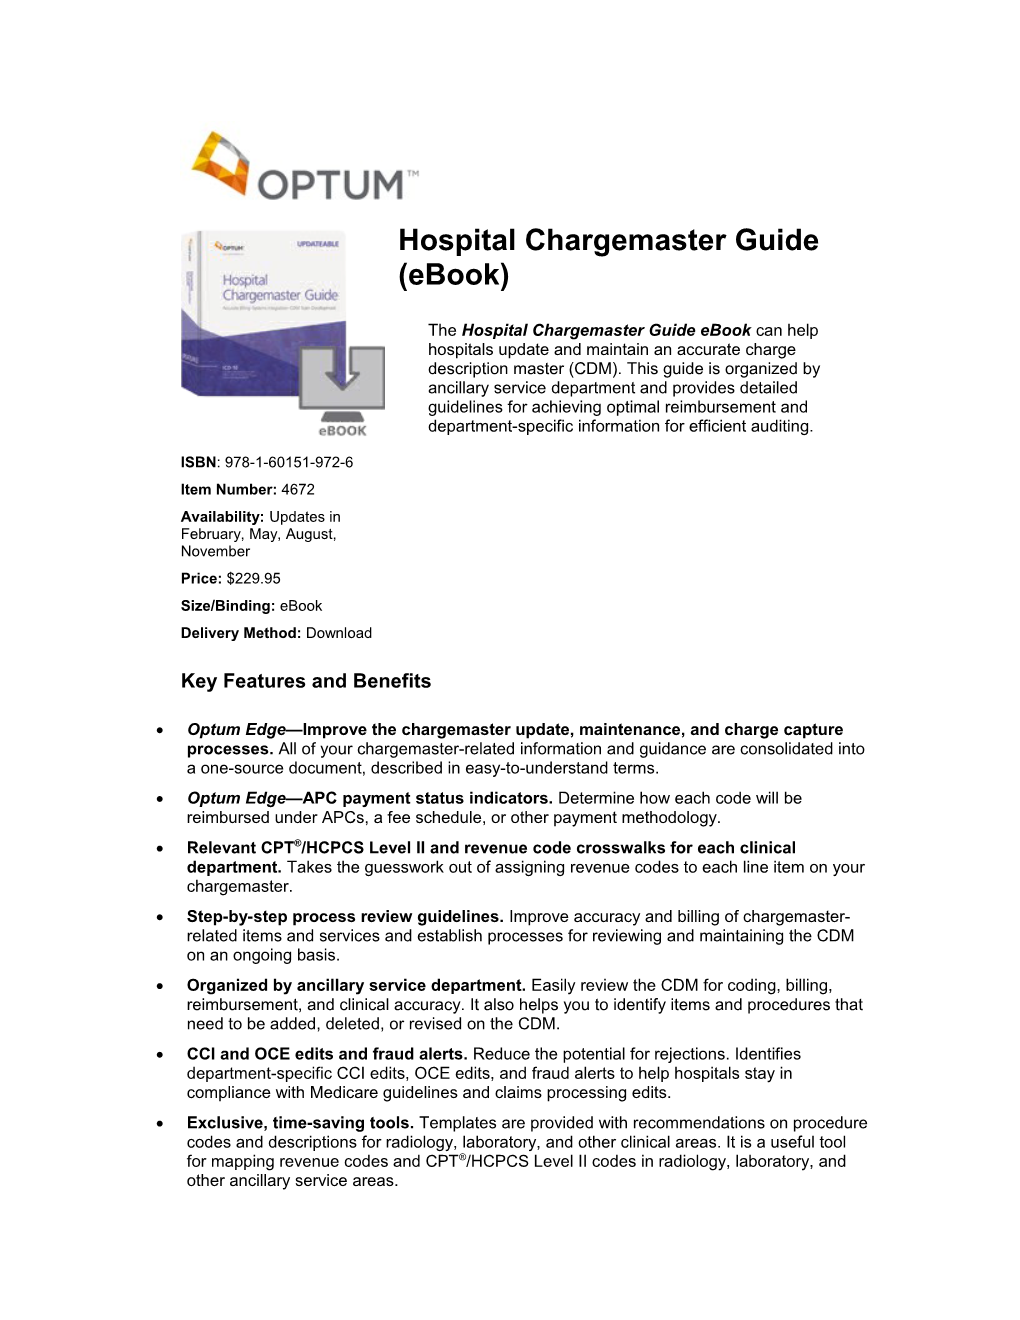 Optum Edge Improve the Chargemaster Update, Maintenance, and Charge Capture Processes